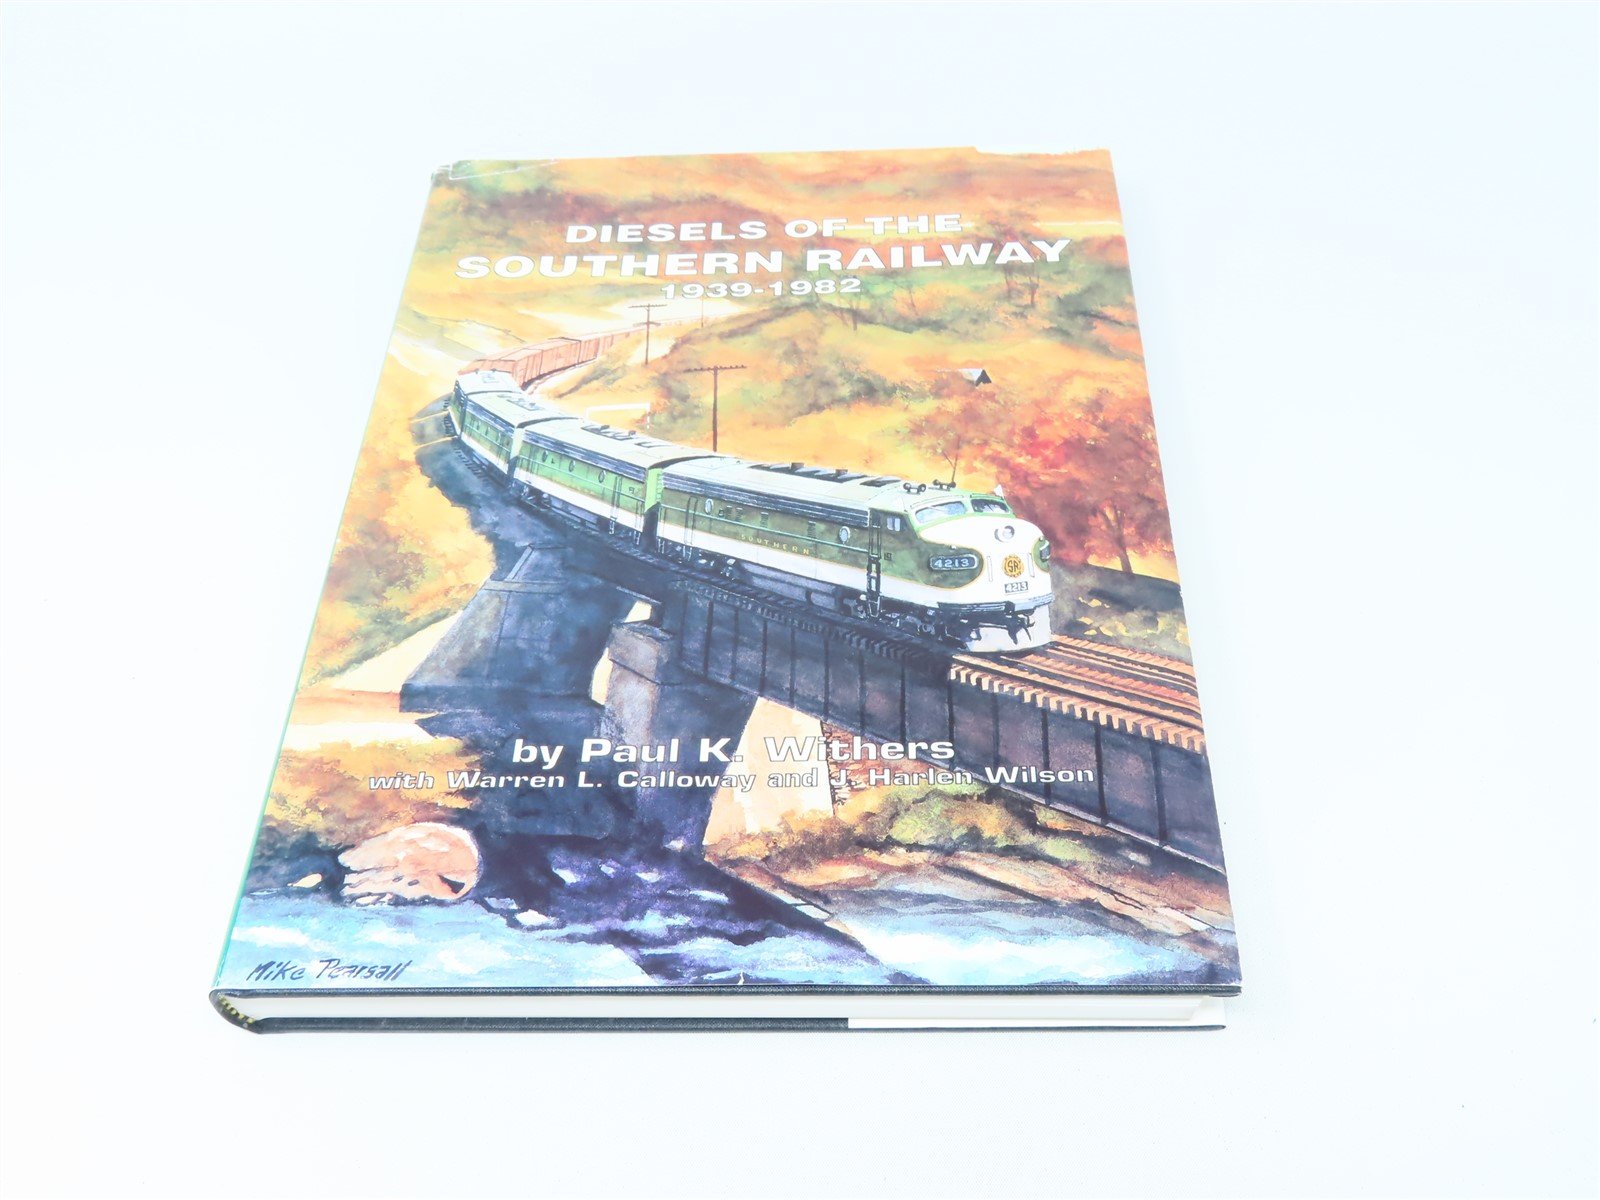 Diesels of the Southern Railway 1939-1982 by Paul K. Withers ©1997 HC Book